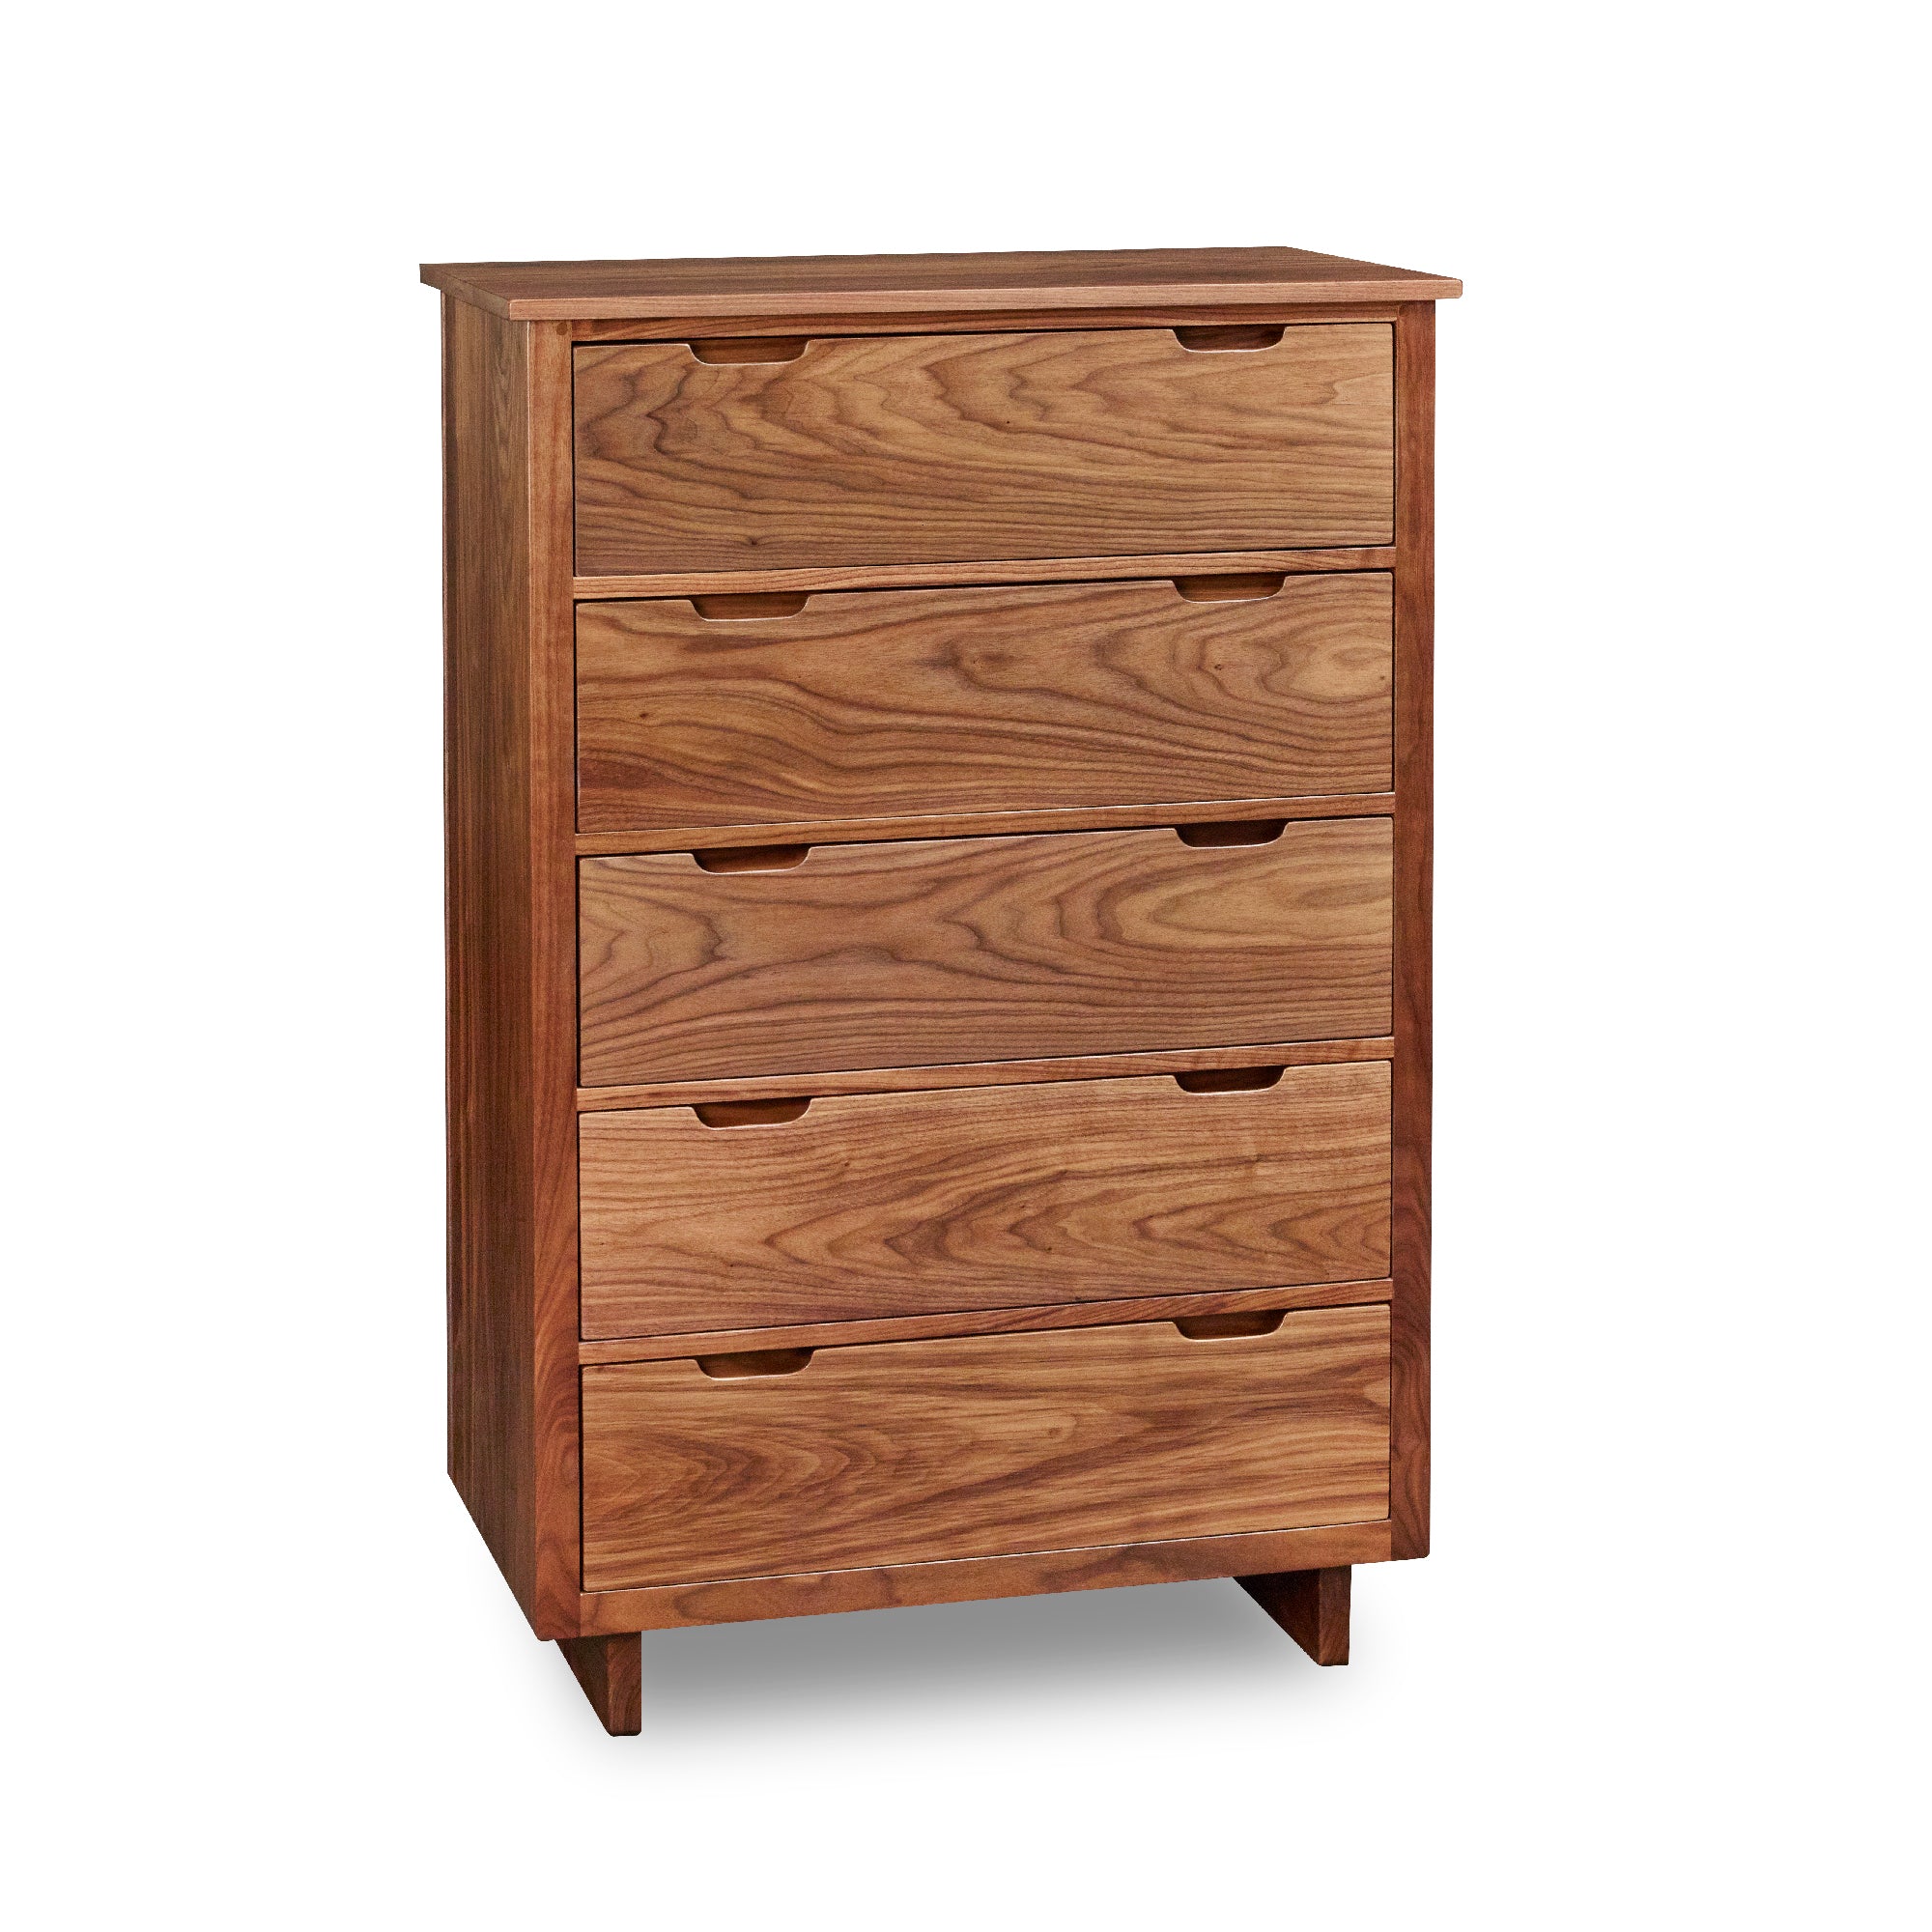 Five drawer Foundation Chest in walnut wood with trestle base and built in drawer pulls